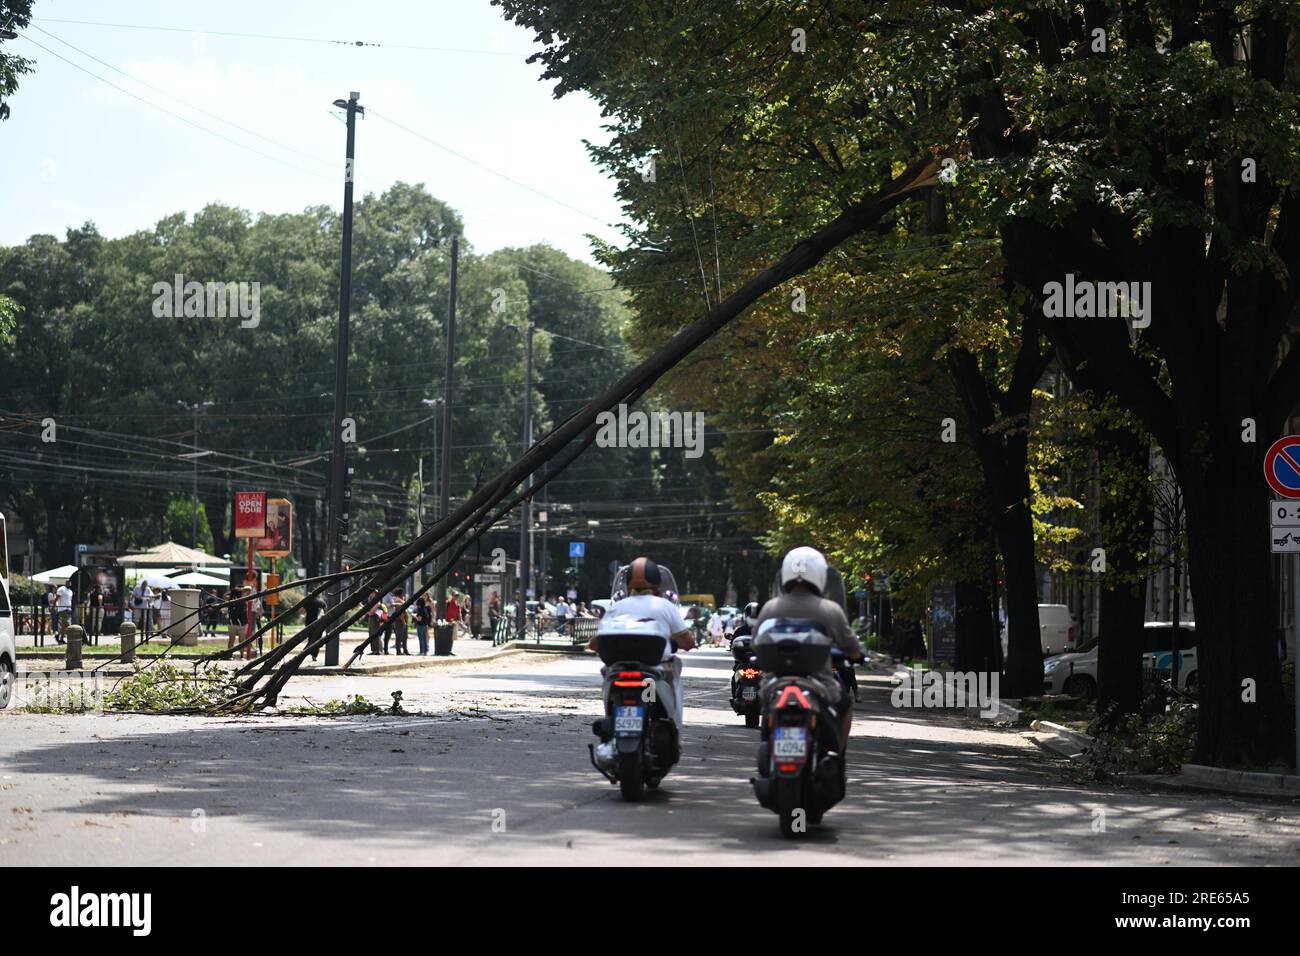 Milan, Italy. 25th July, 2023. A broken branch is seen after thunderstorms in Milan, Italy, on July 25, 2023. While the southern two-thirds of Italy struggled under the oppressive heat, most of the northern area was pelted by thunderstorms and over-sized hail. Media reports said the emergency services in Milan had responded to more than 200 requests for help related to flooding, fallen trees, and damage to cars and homes, since a severe storm hit the city late Monday. Credit: Str/Xinhua/Alamy Live News Stock Photo